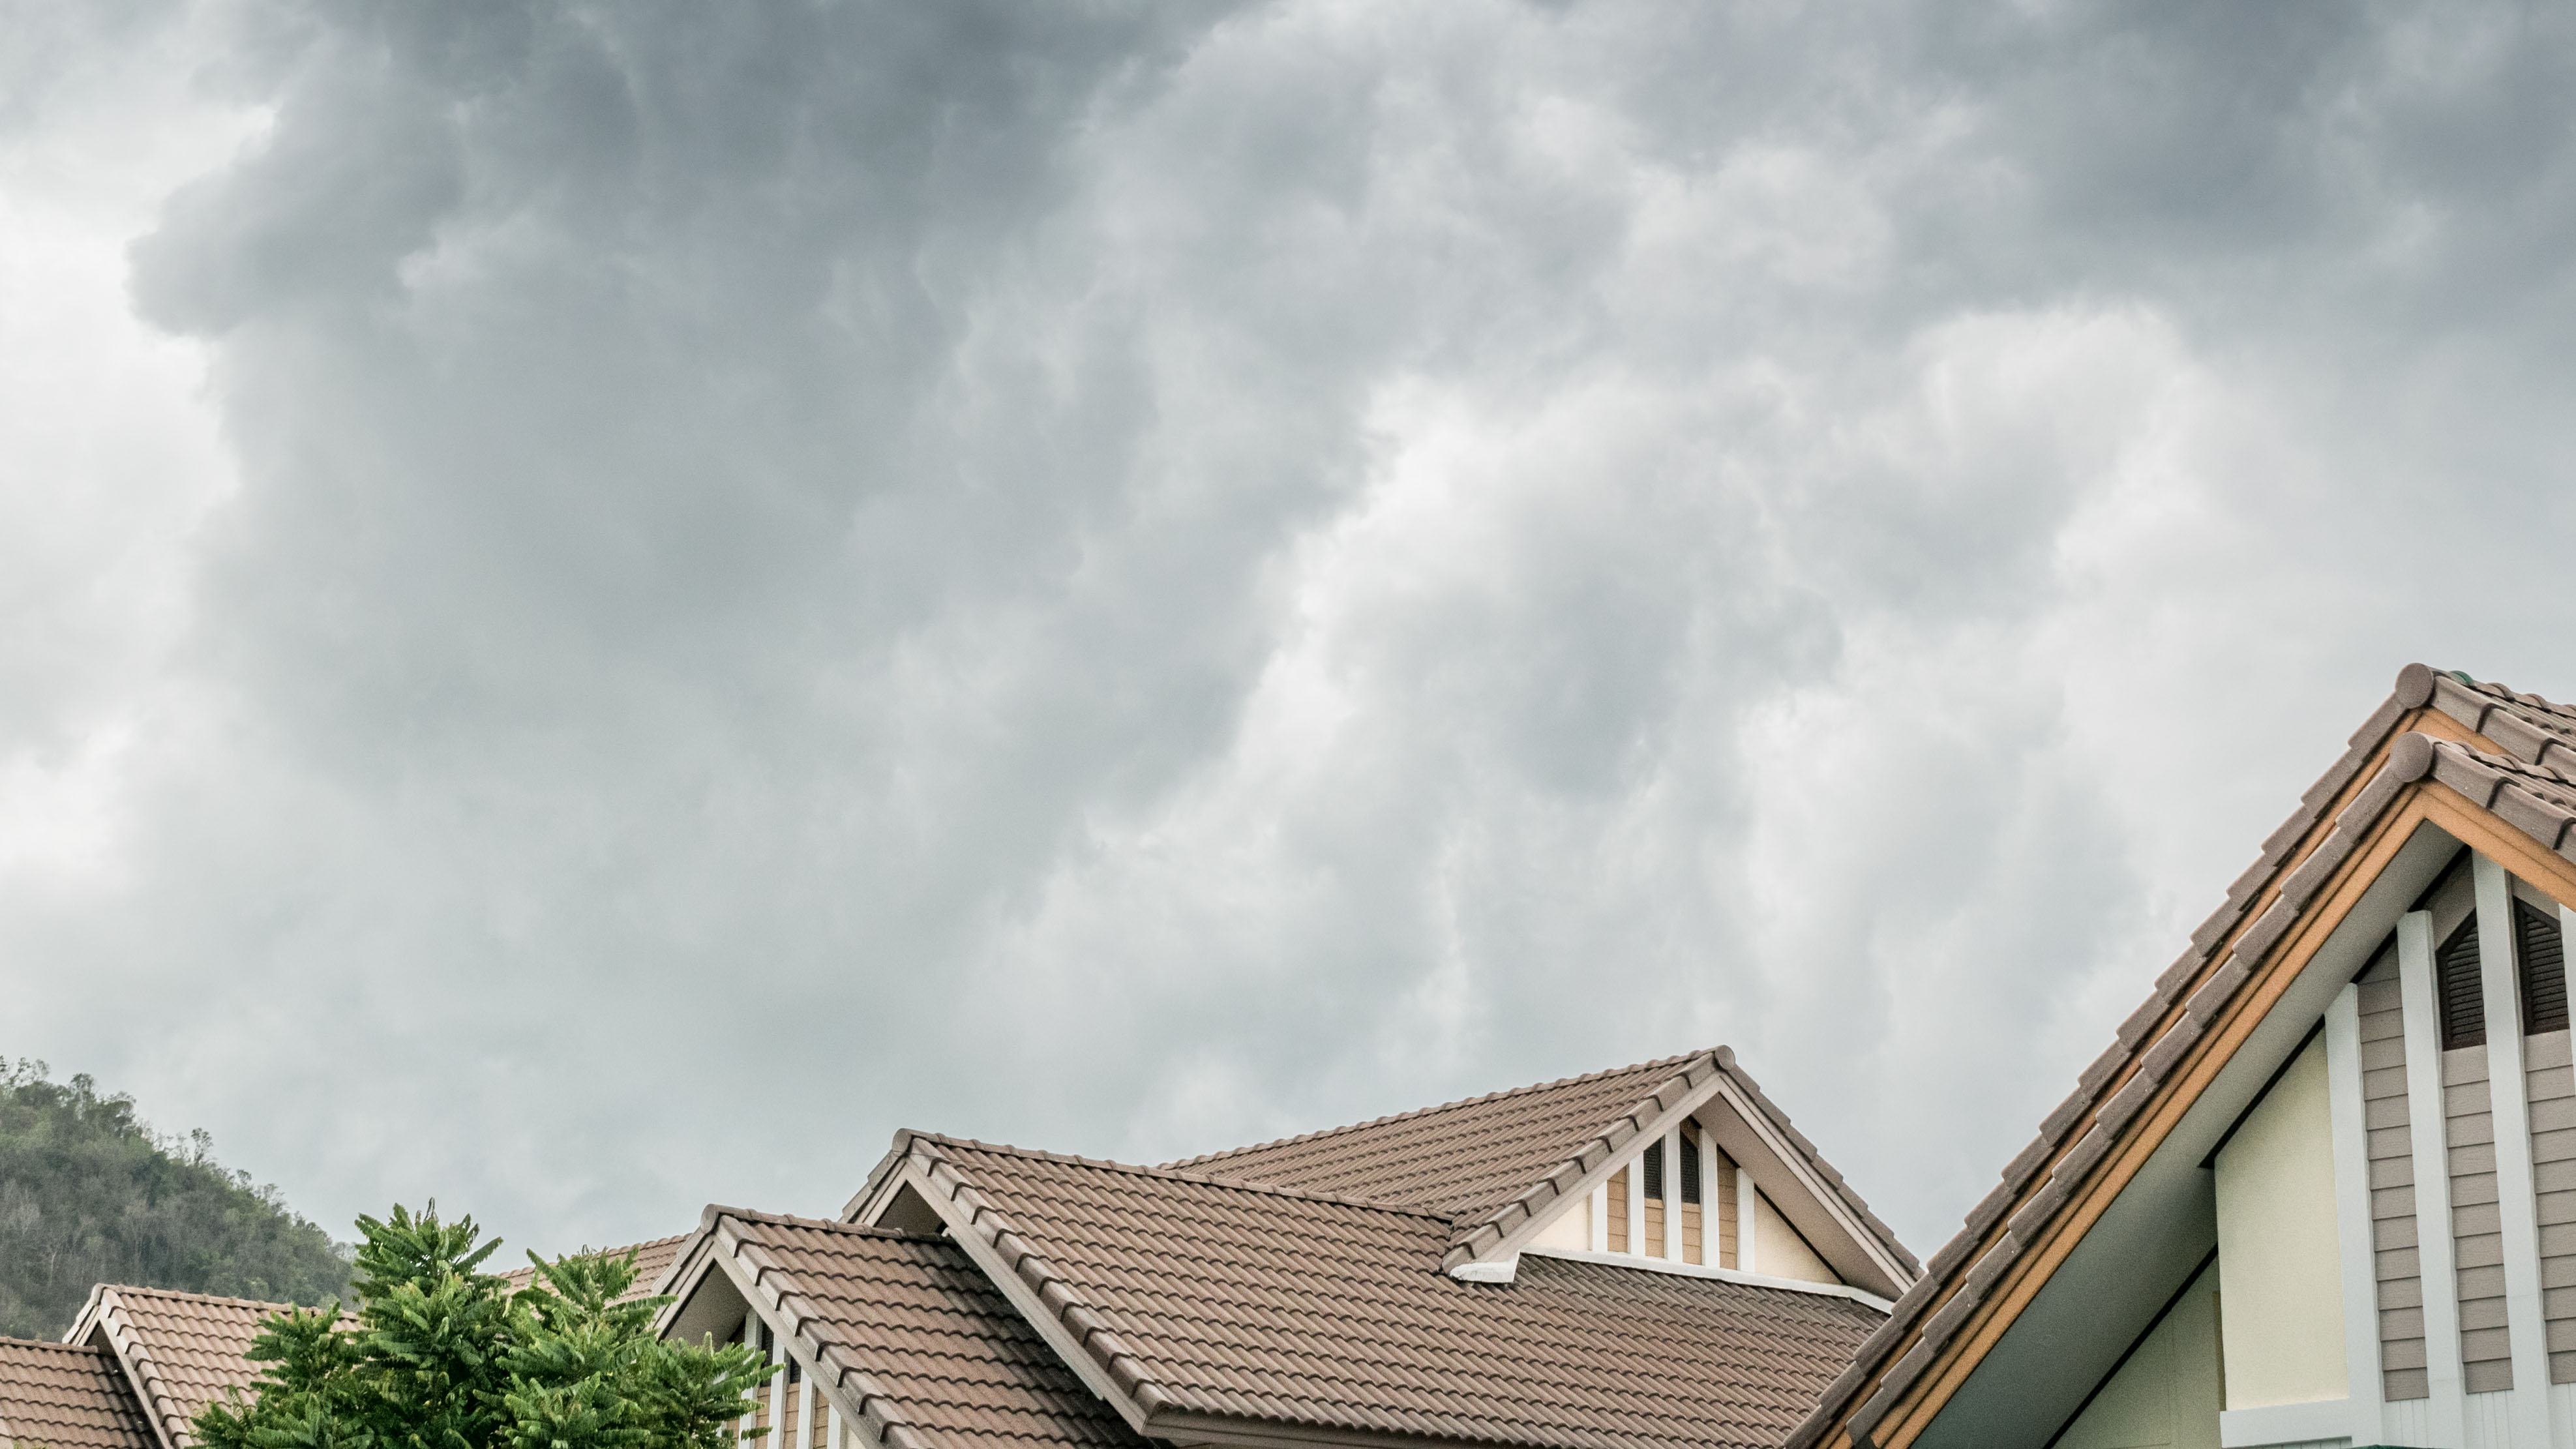 Storm cloud over house with adequate home insurance coverage